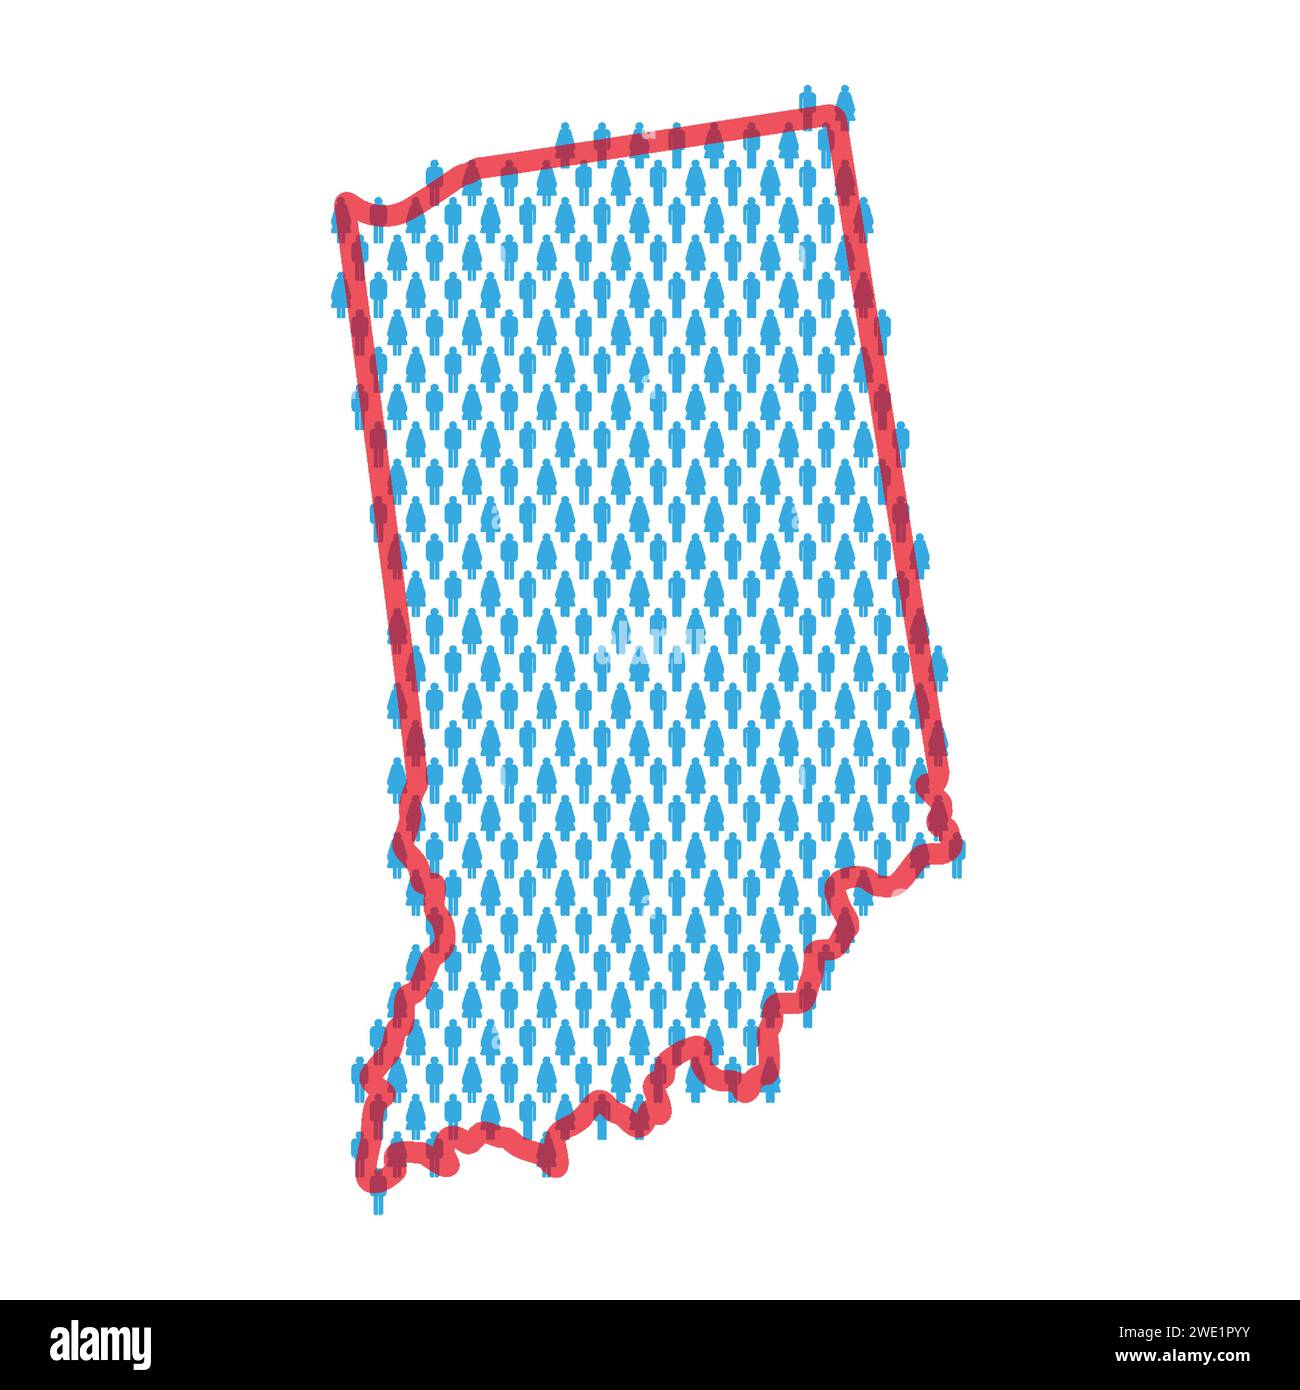 Indiana population map. Stick figures people map with bold red translucent state border. Pattern of men and women icons. Isolated vector illustration. Stock Vector